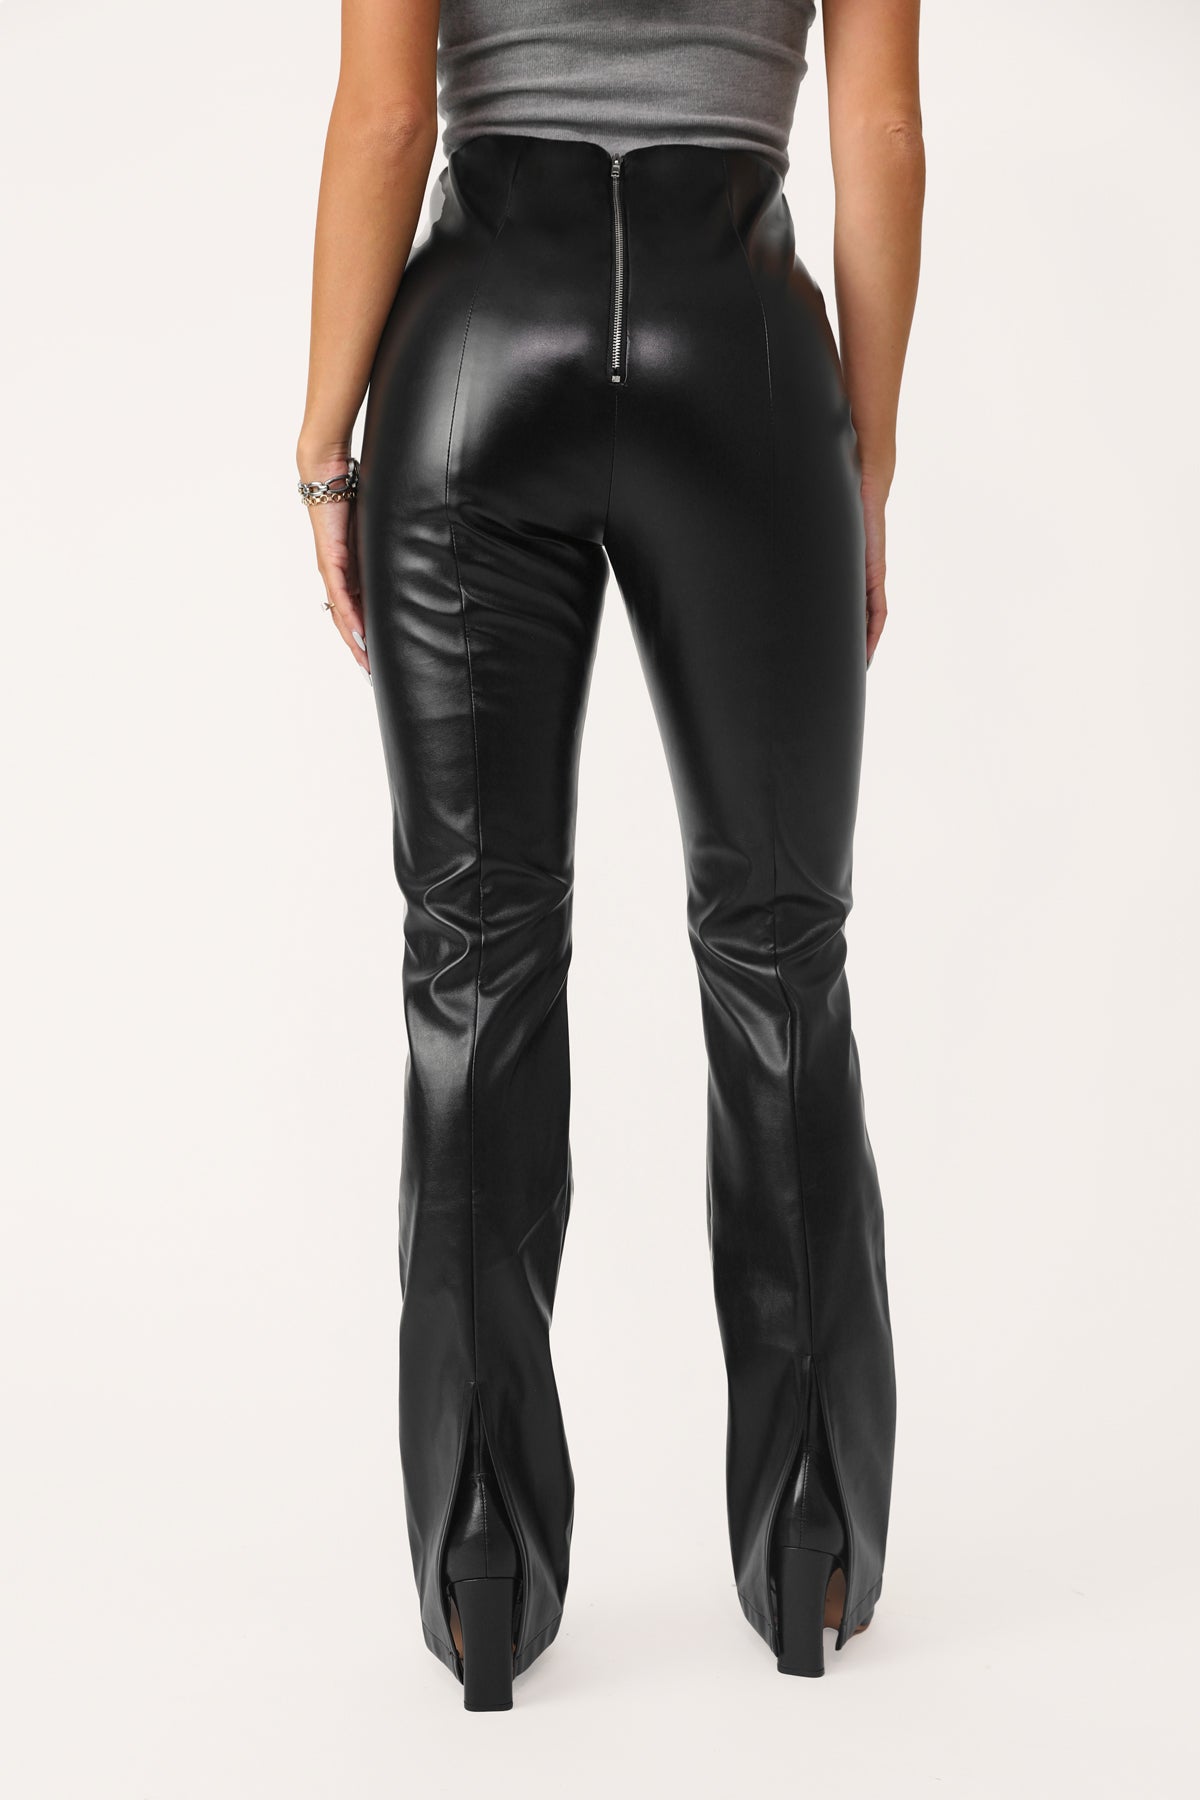 RIZZO BLACK FAUX PANT Kittenish LEATHER – FLARE